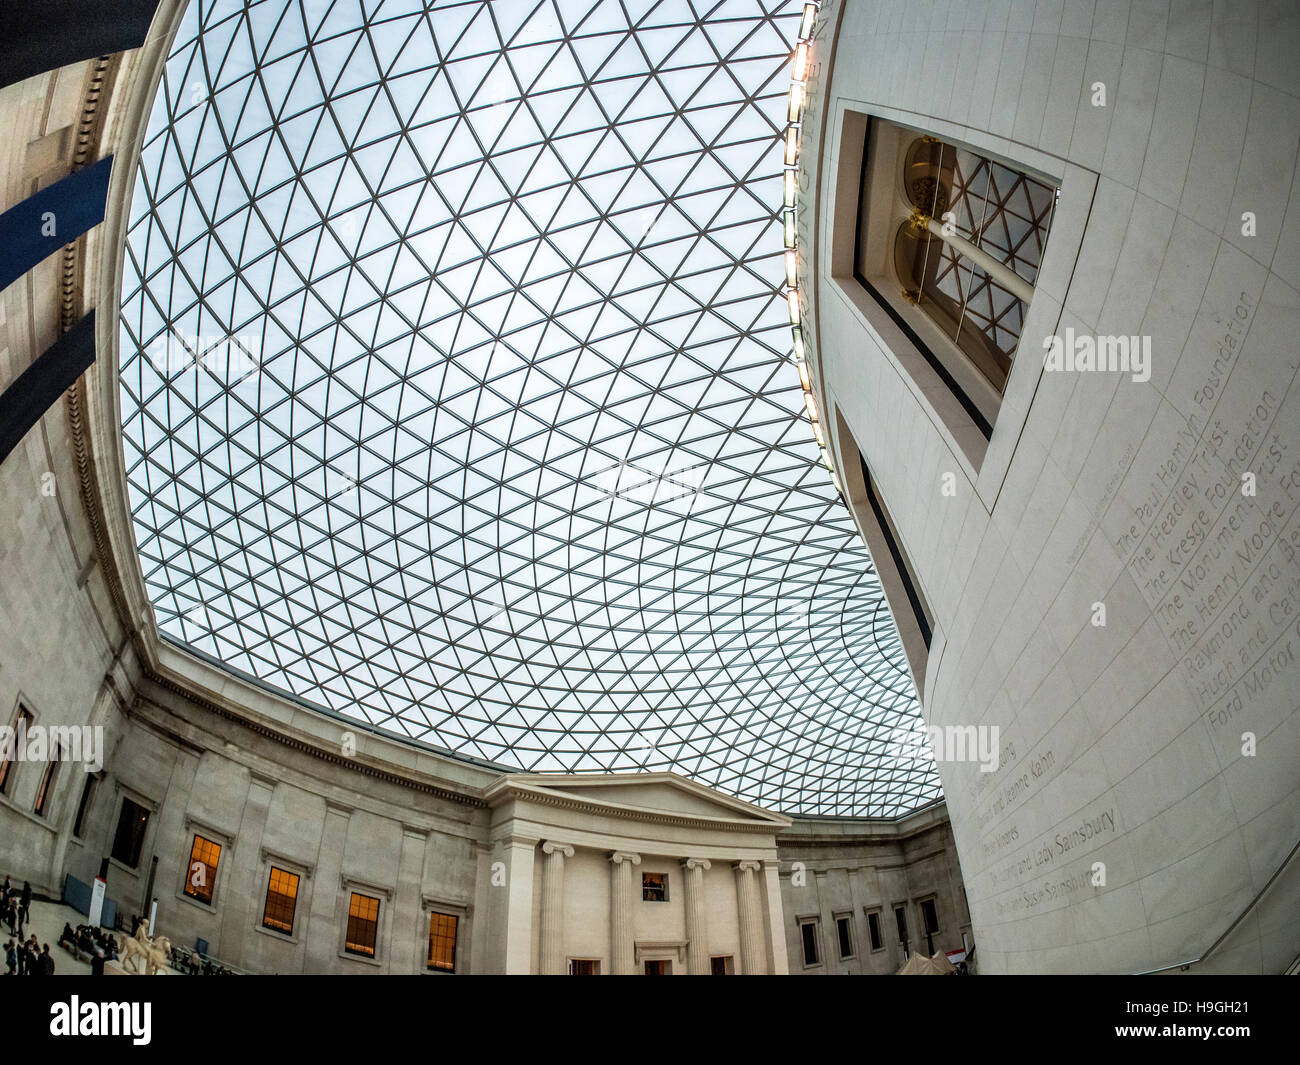 Queen Elizabeth II Great Court designed by Foster and Partners, The British Museum, London, UK. Stock Photo